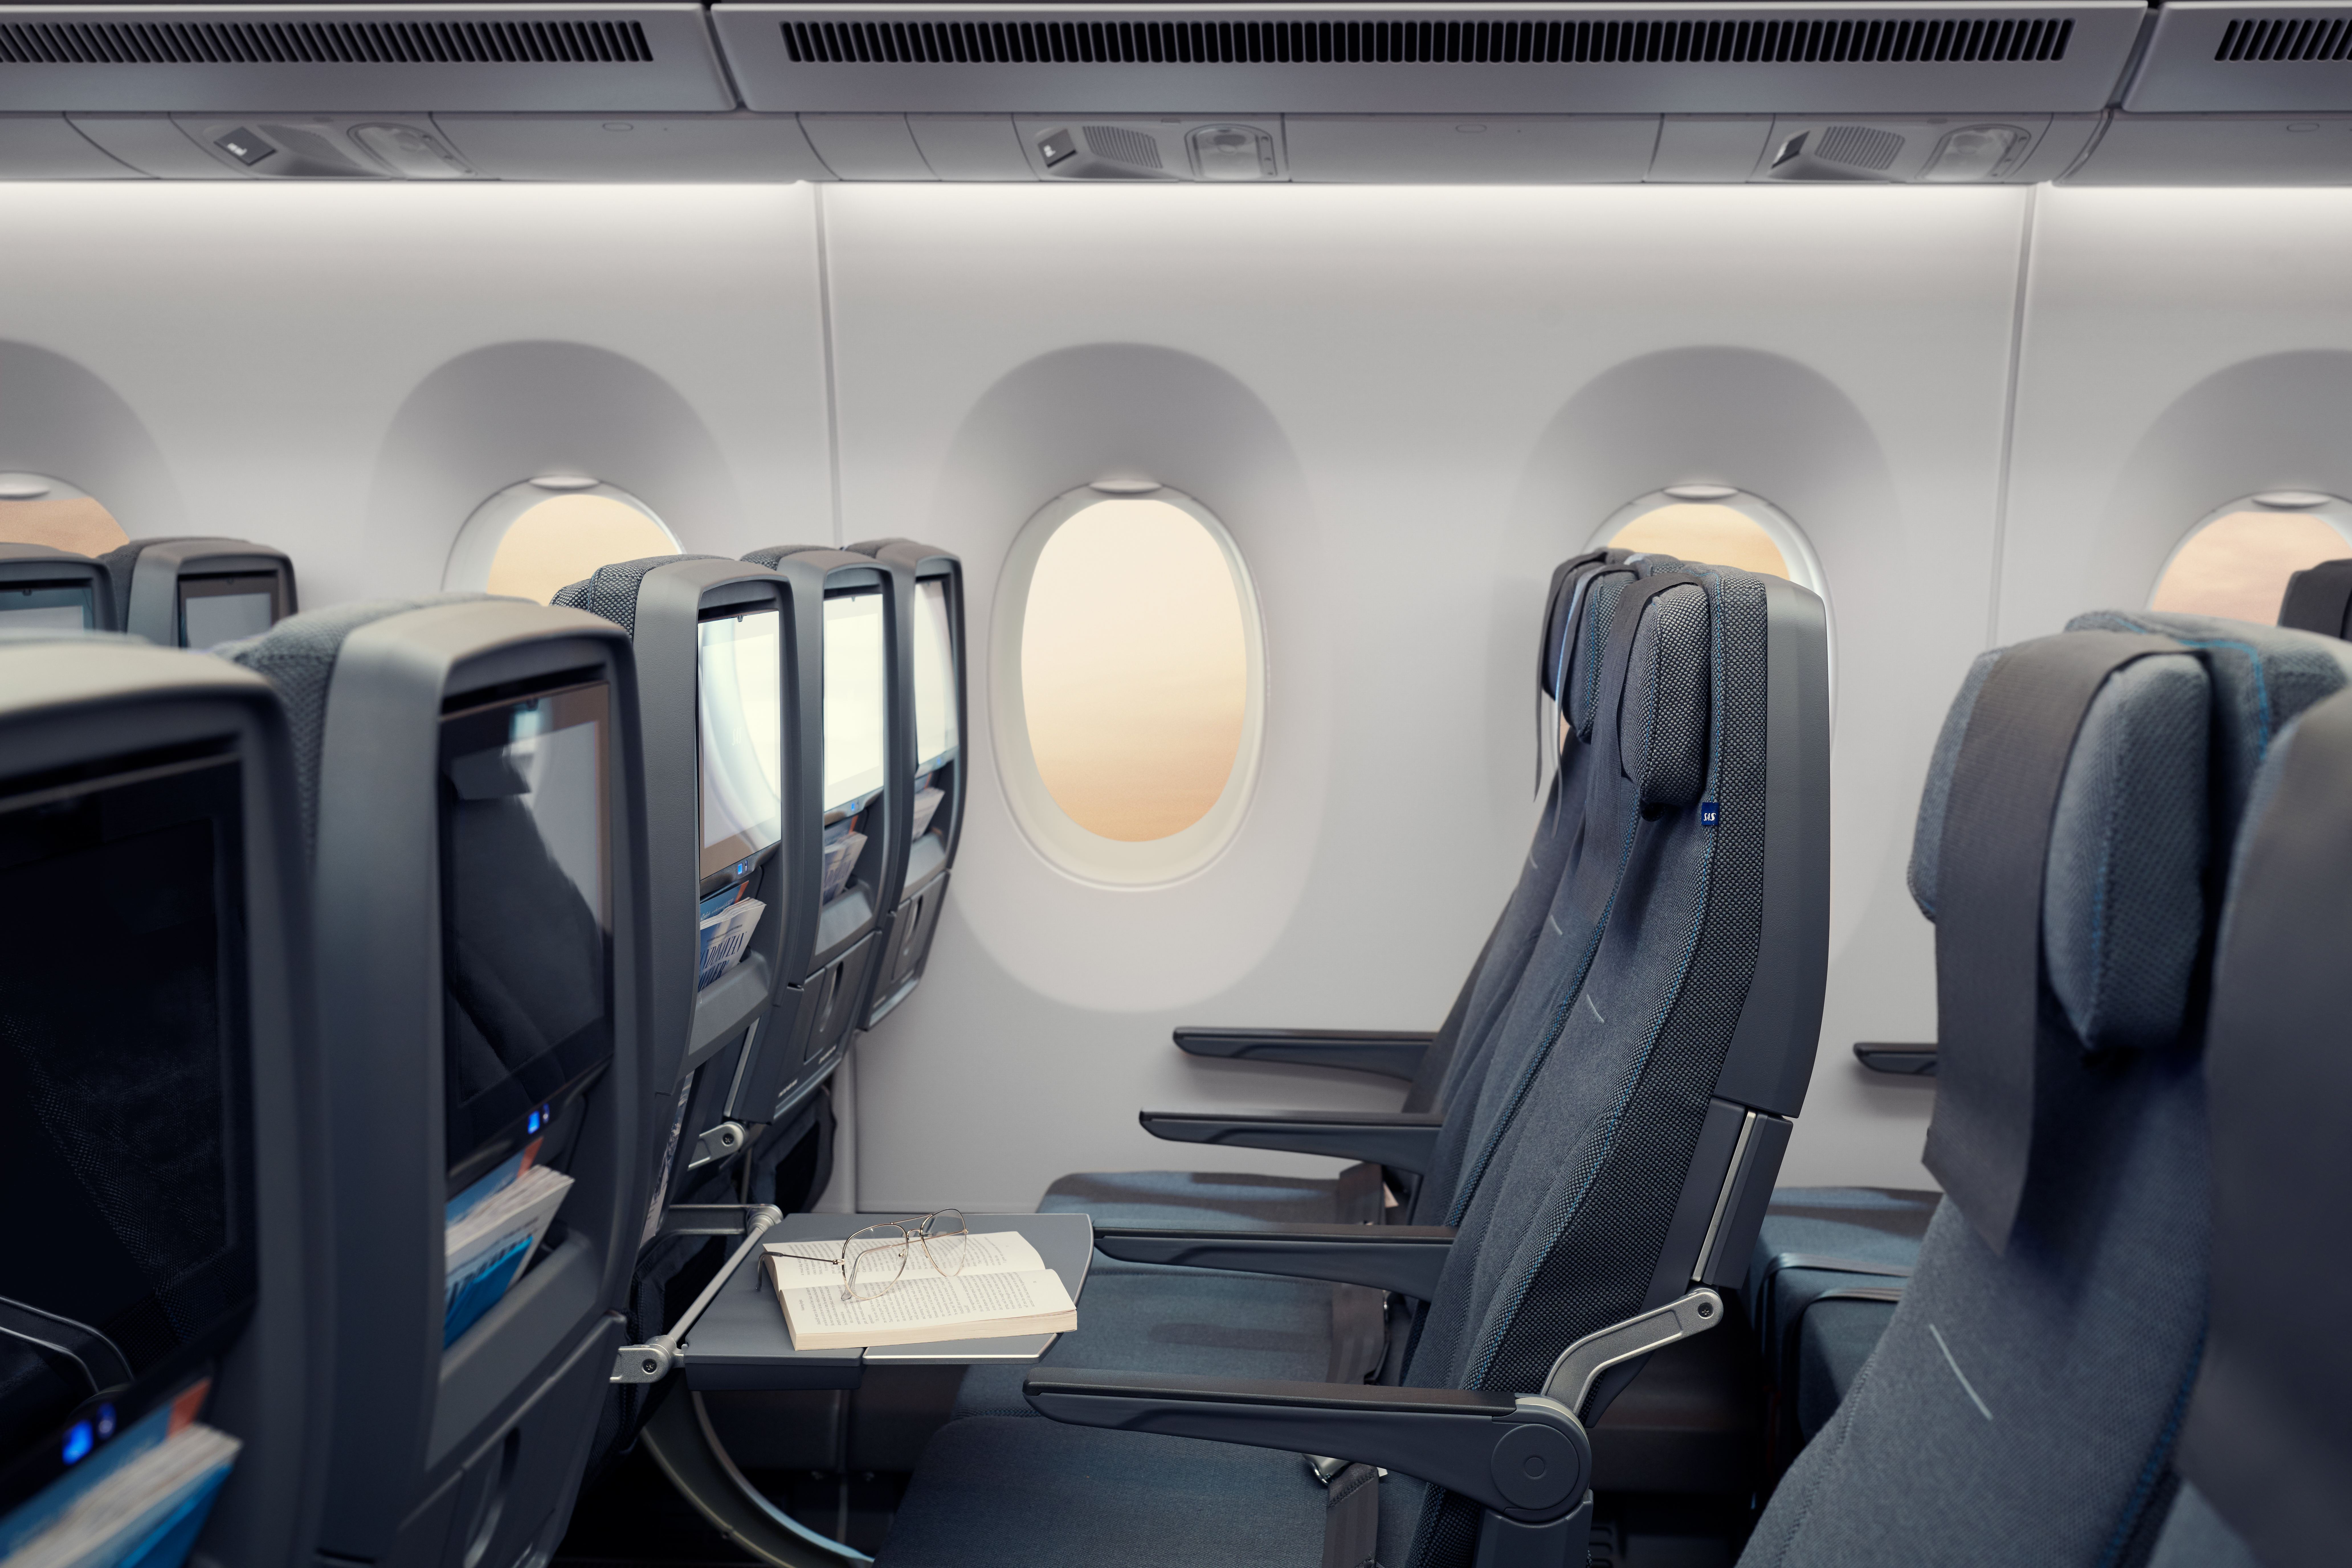 In SAS Go travelers can look forward to improved seats, better storage and a bi-fold tray table.